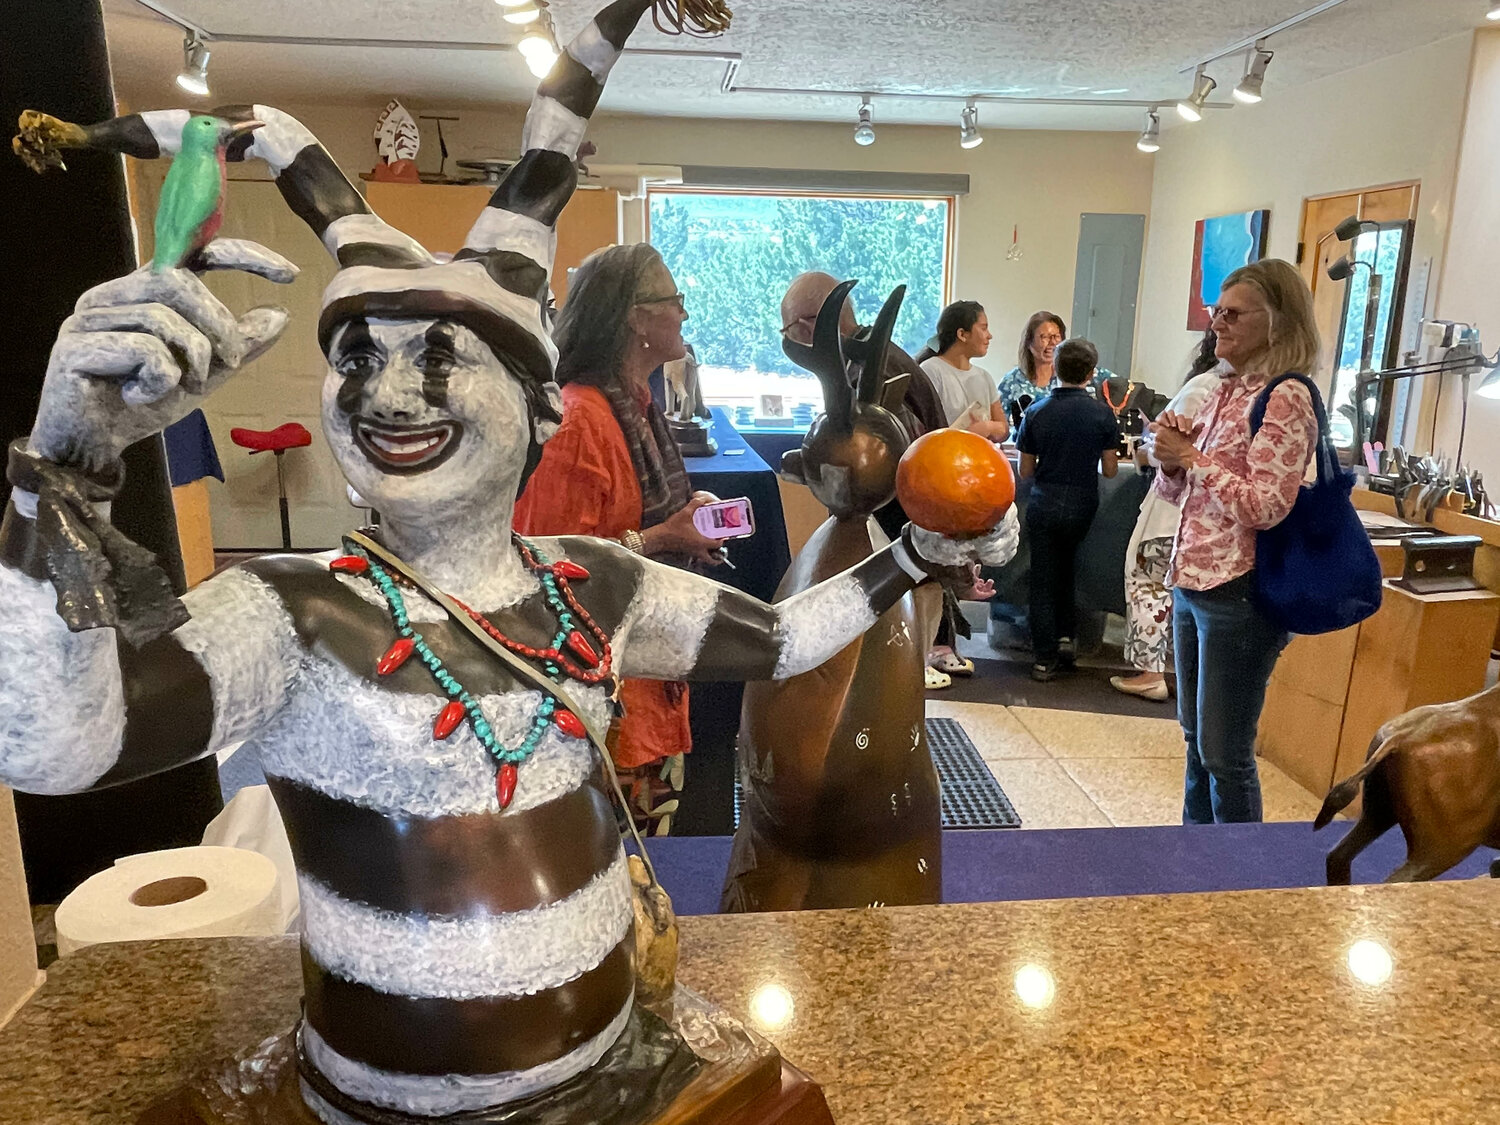 A sculpture of a pueblo clown greeted visitors to the home studio of Althea and Joe Cajero during last weekend's Placitas Studio Tour. (T.S. Last/Sandoval Signpost)